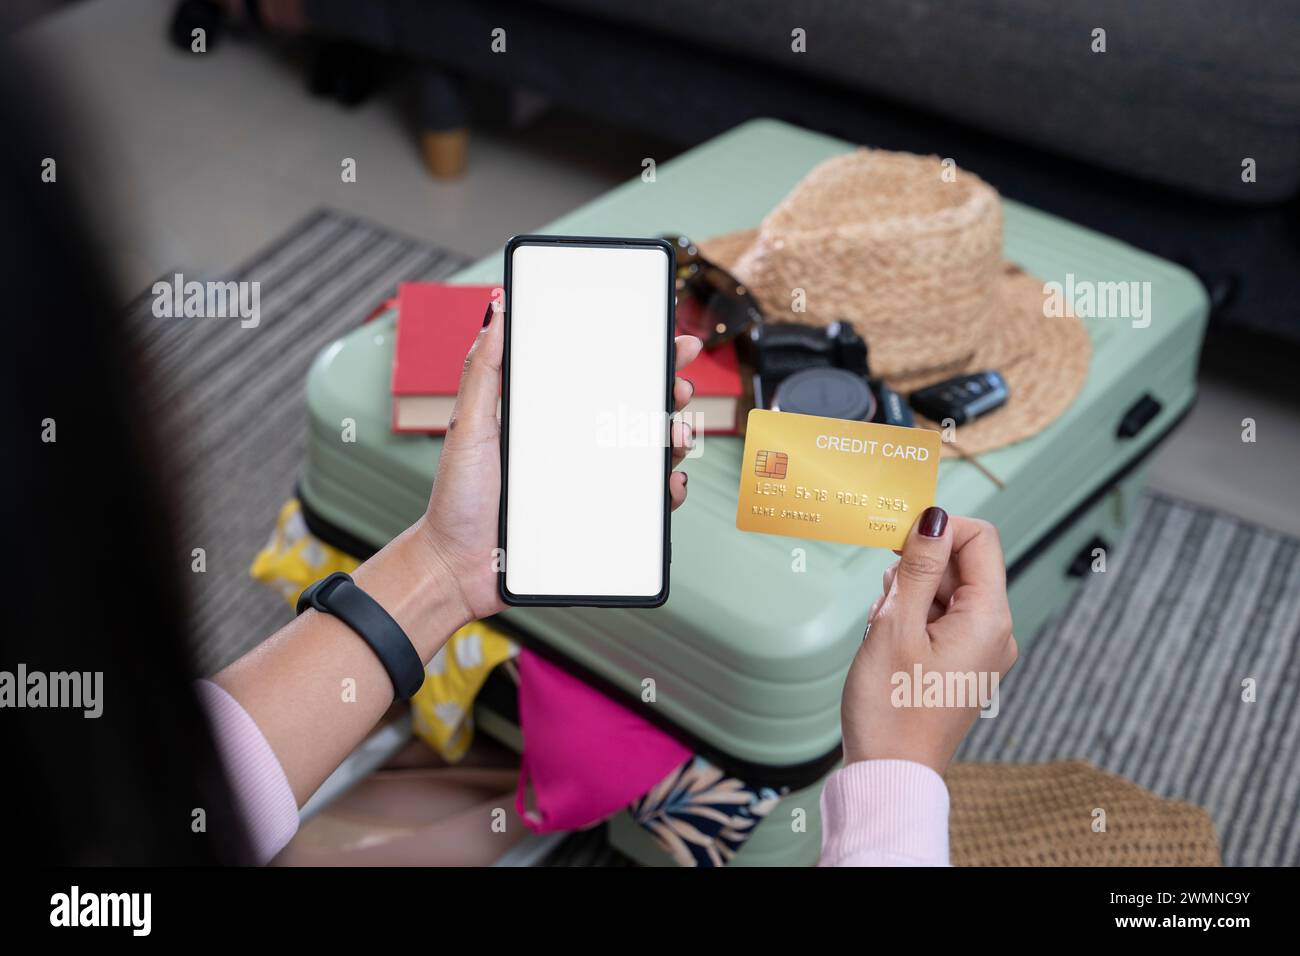 Woman's hand taking a credit card while using a phone, white background with a suitcase in the background. Stock Photo